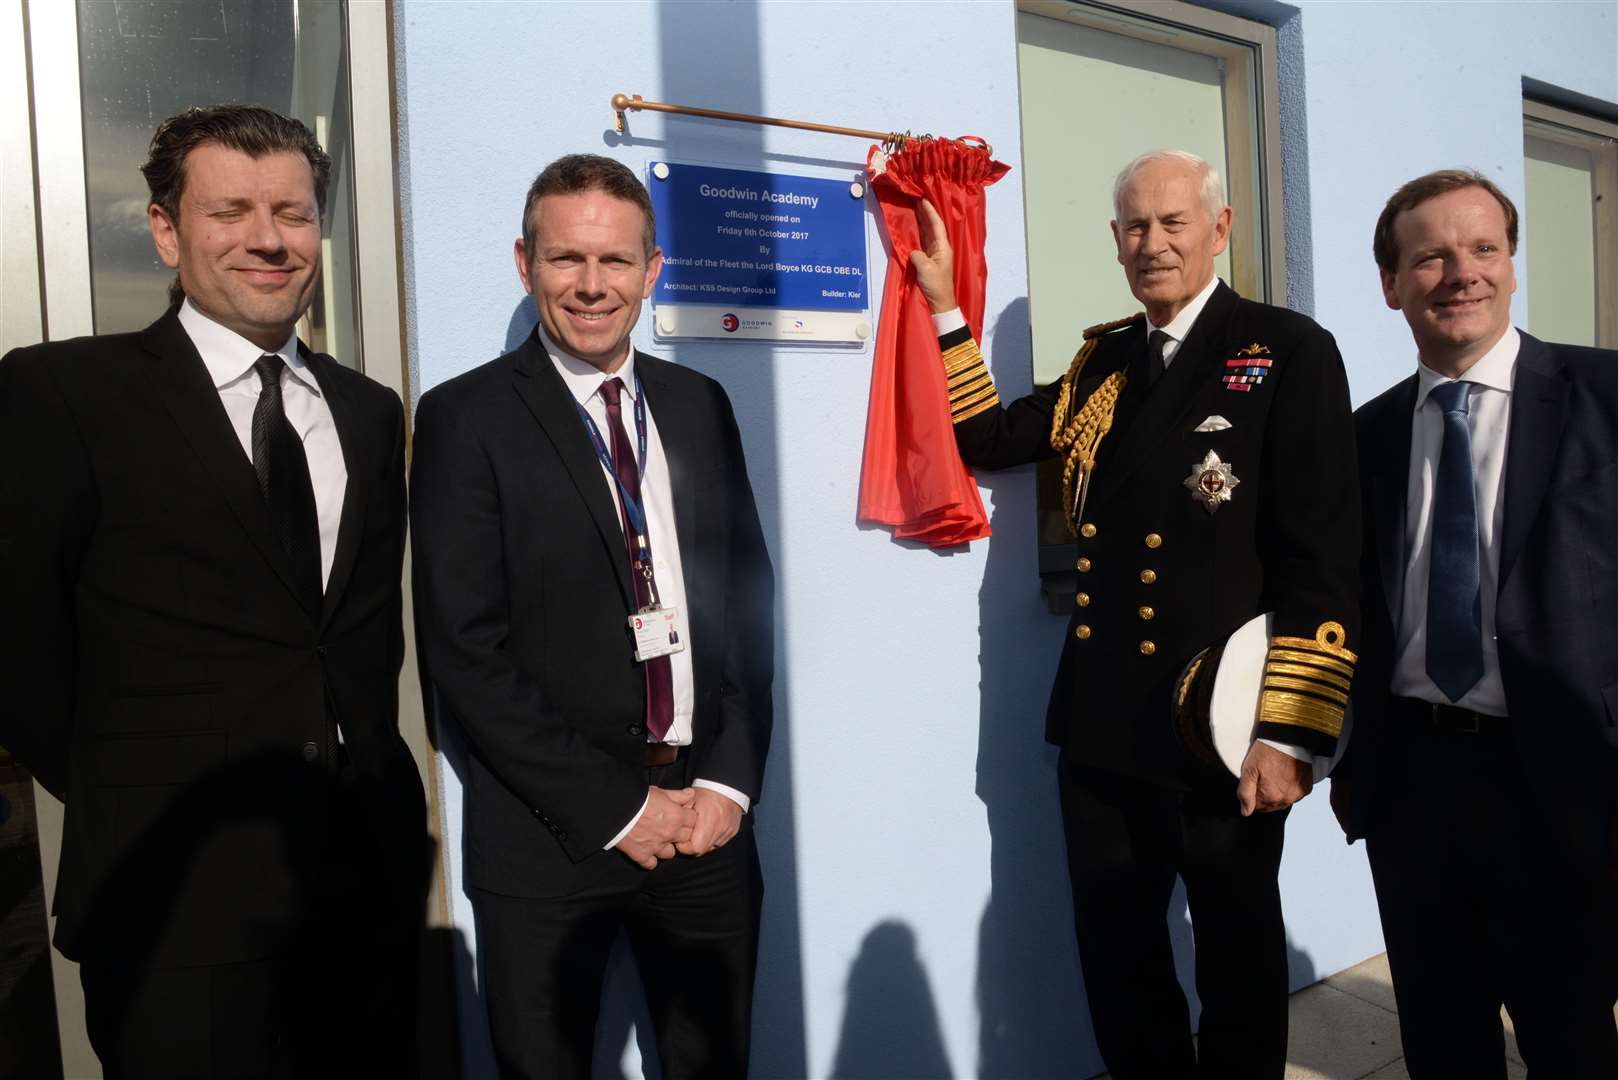 The RNLI in Walmer has paid tribute to Lord Boyce (second in from the right) by lowering their station flag. Picture: Chris Davey